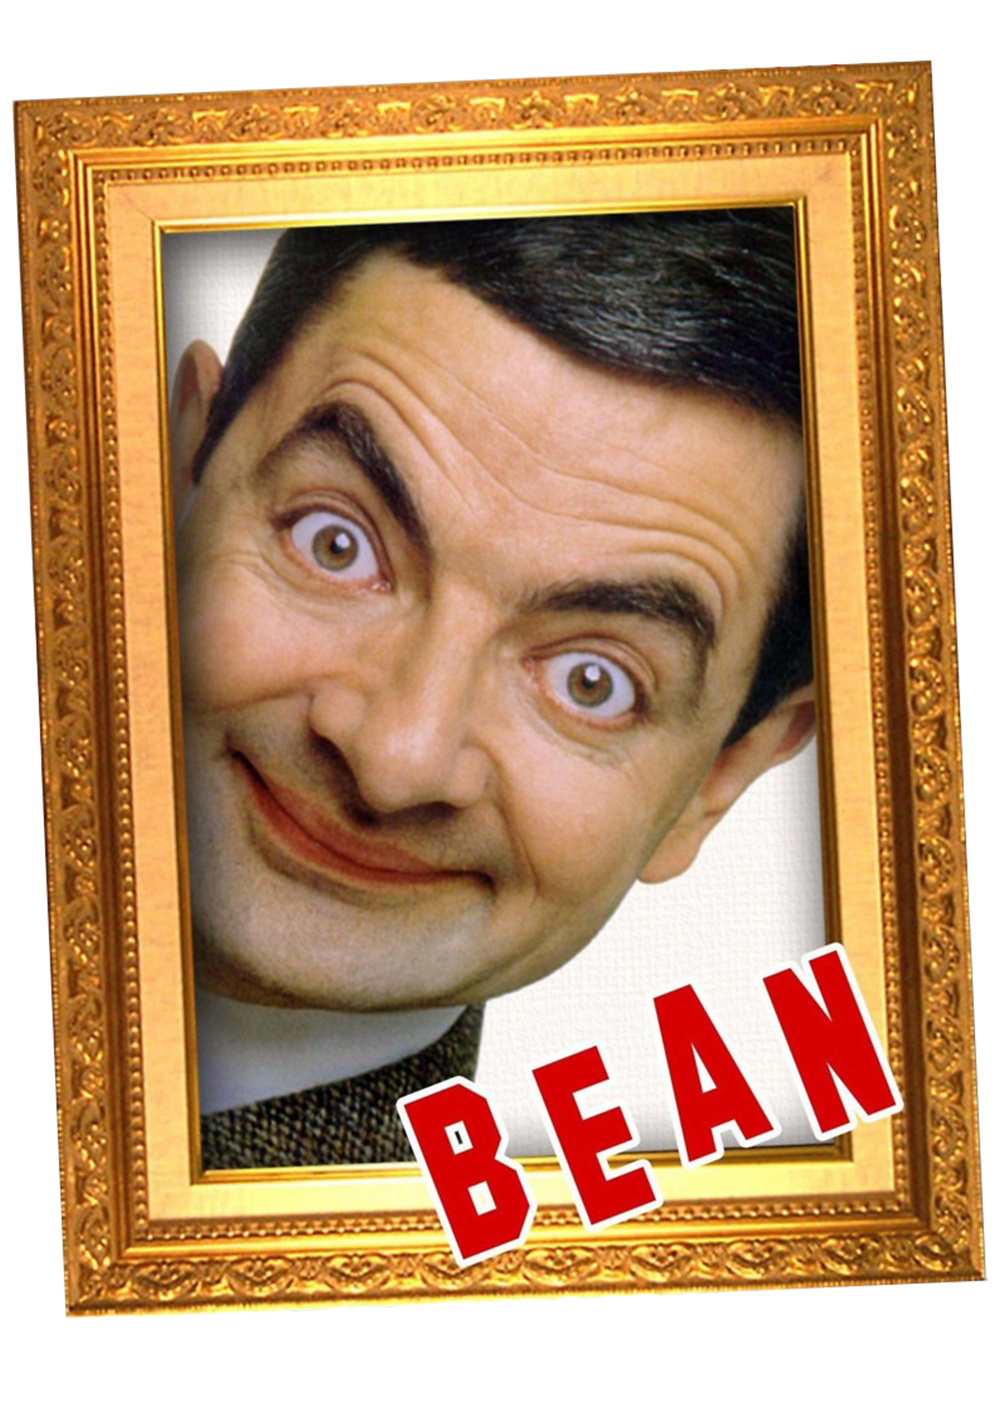 Bean Picture